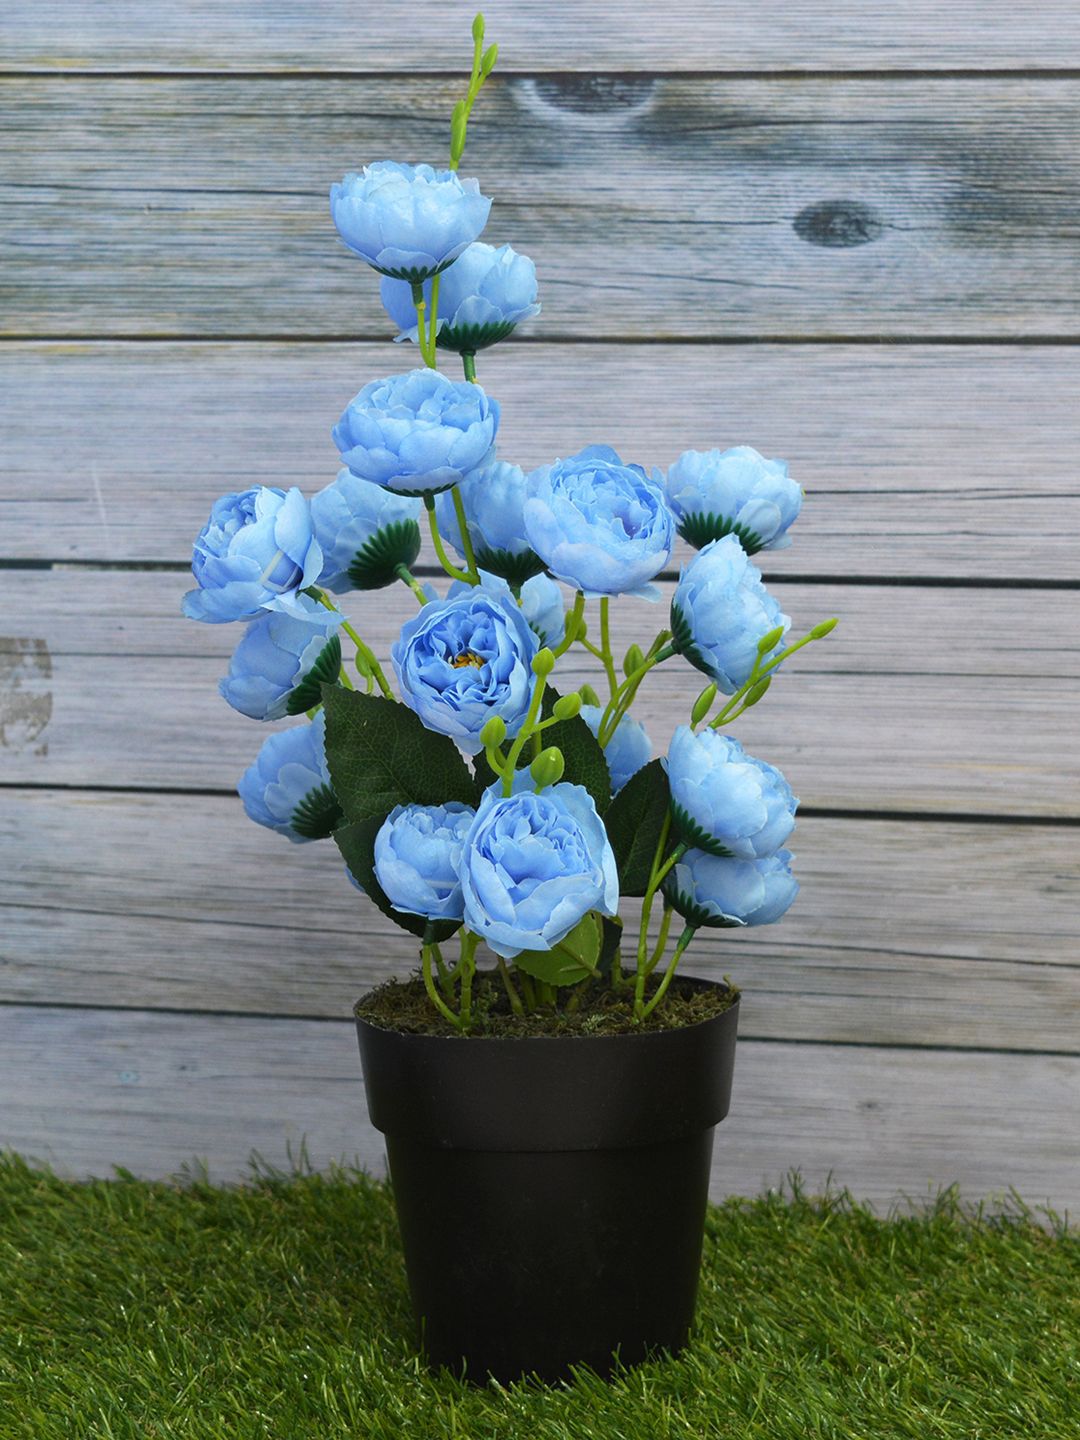 fancy mart Blue Bengal Rose Artificial Flower in Cone Pot Price in India